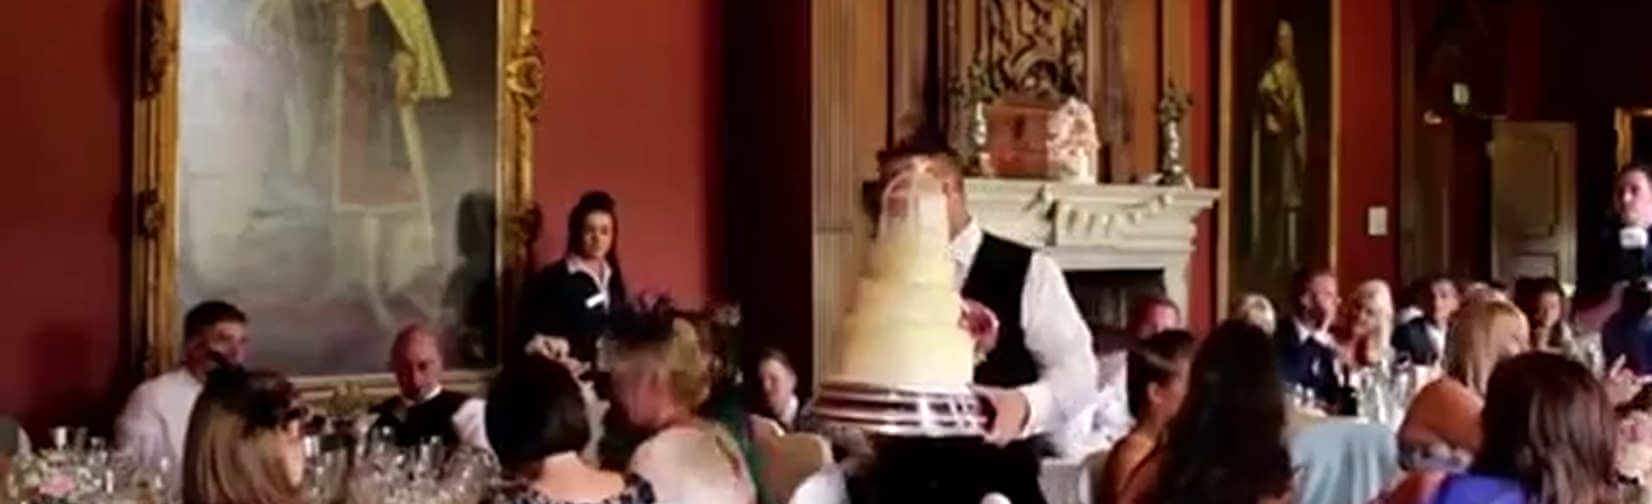 Would you put up with the antics of this Groom on your Wedding Day